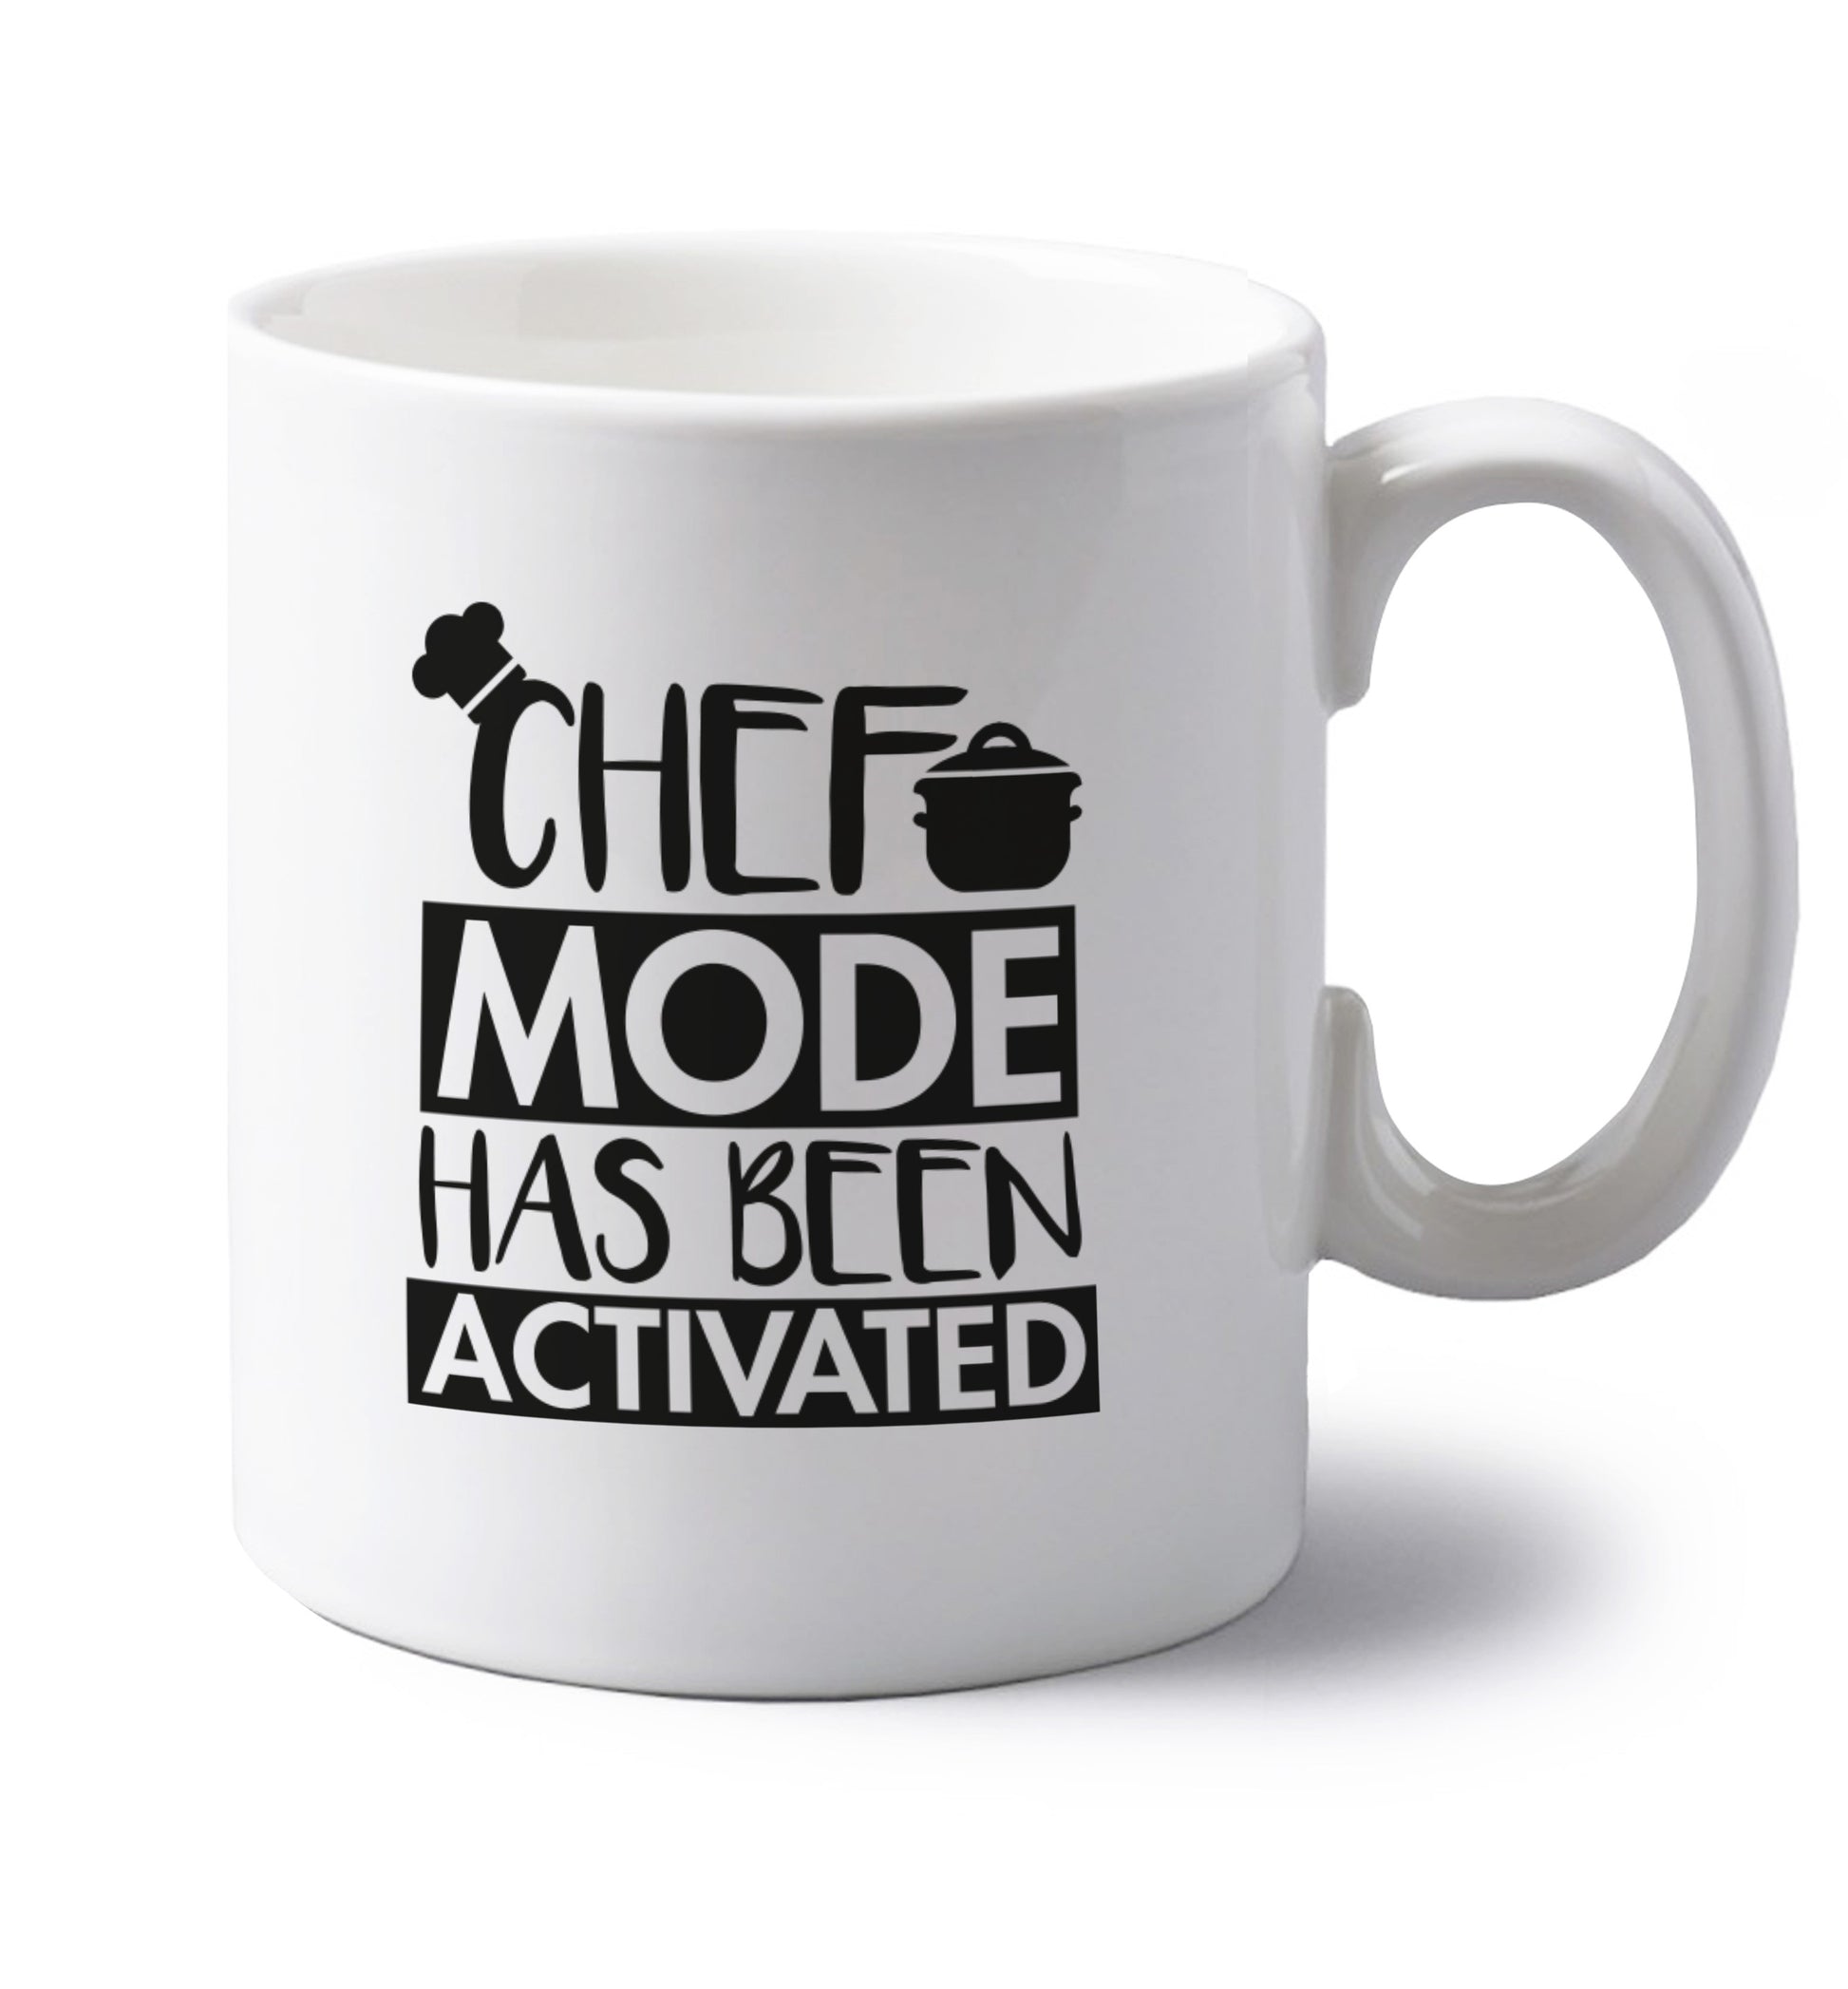 Chef mode has been activated left handed white ceramic mug 